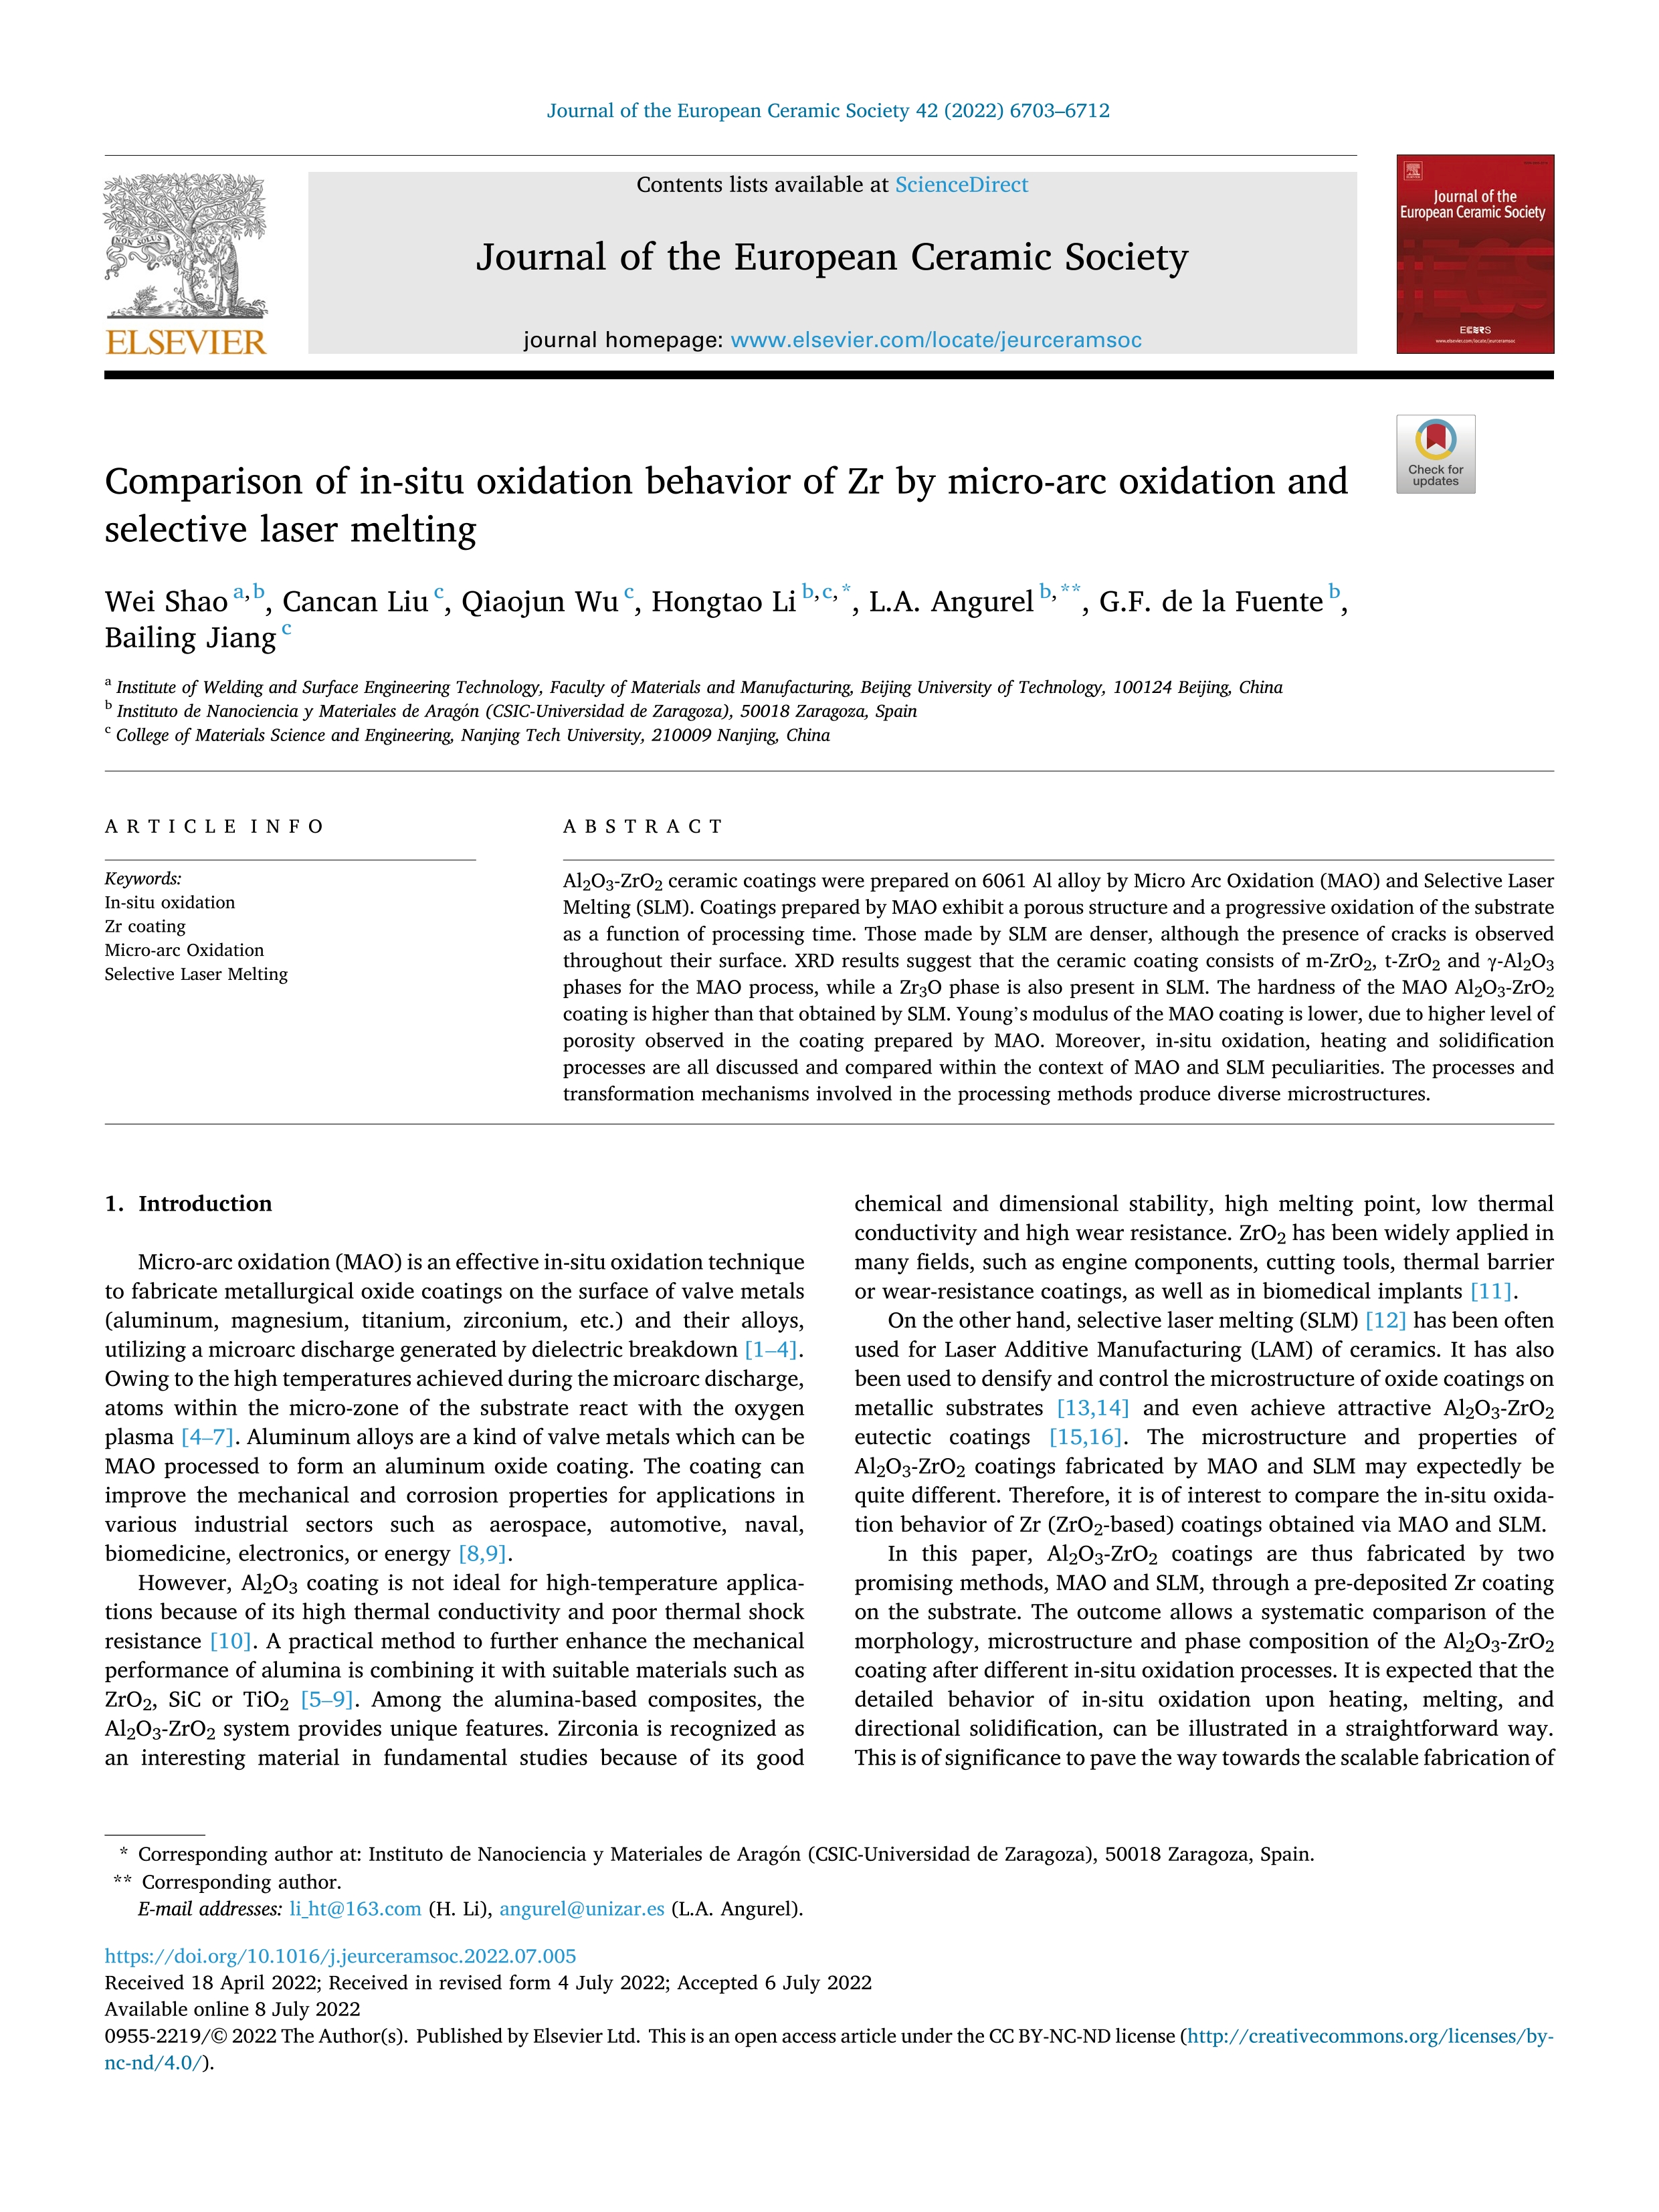 Comparison of in-situ oxidation behavior of Zr by micro-arc oxidation and selective laser melting